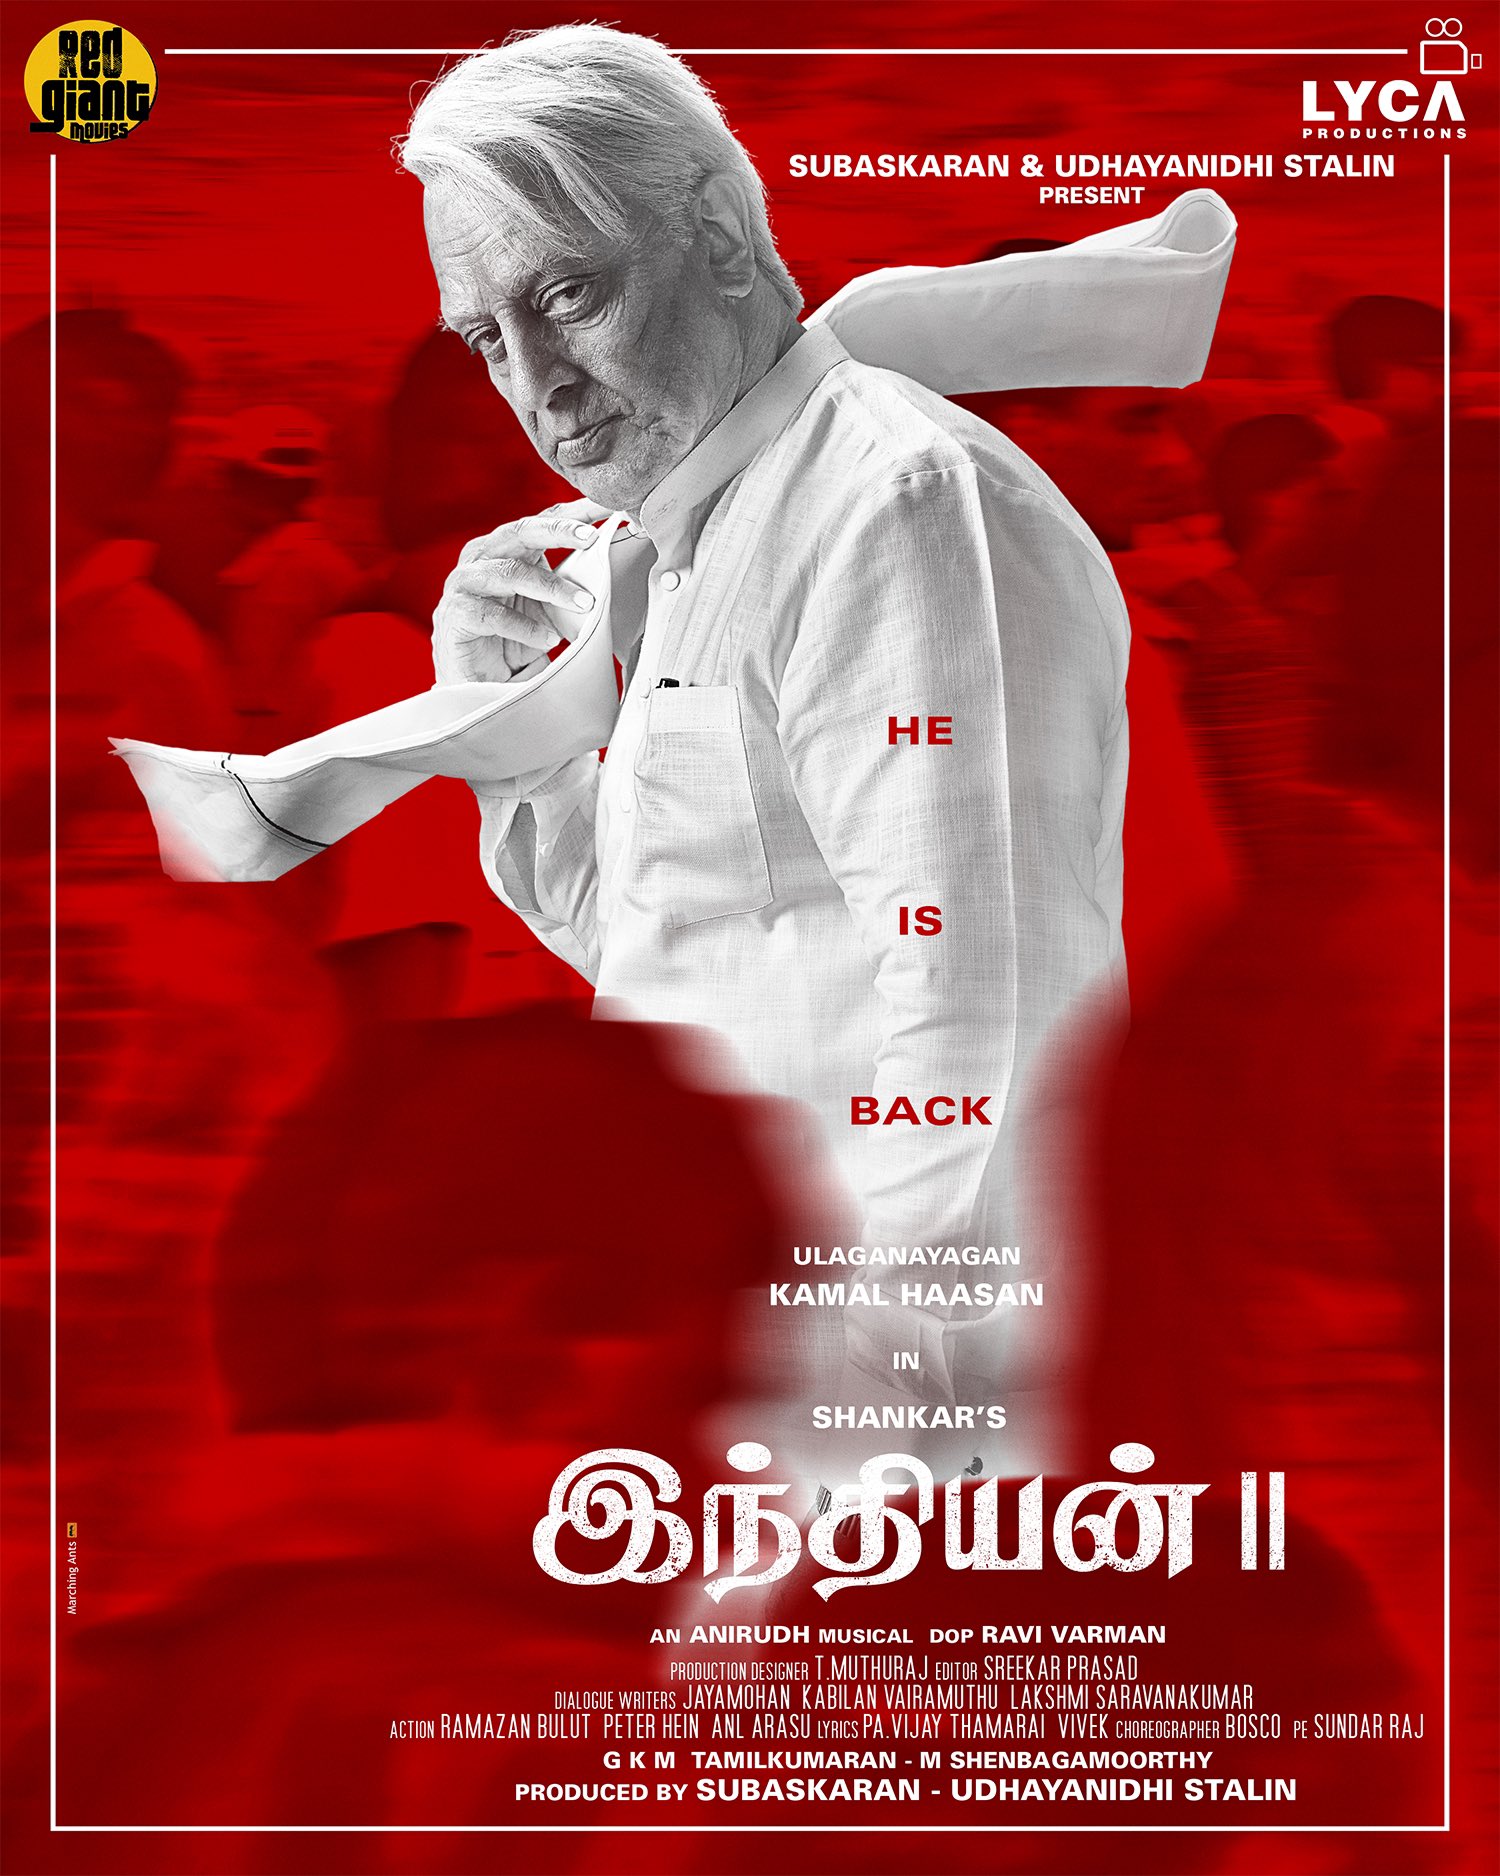 Kamal Haasan Indian2 Movie New Poster Red Giant Movies